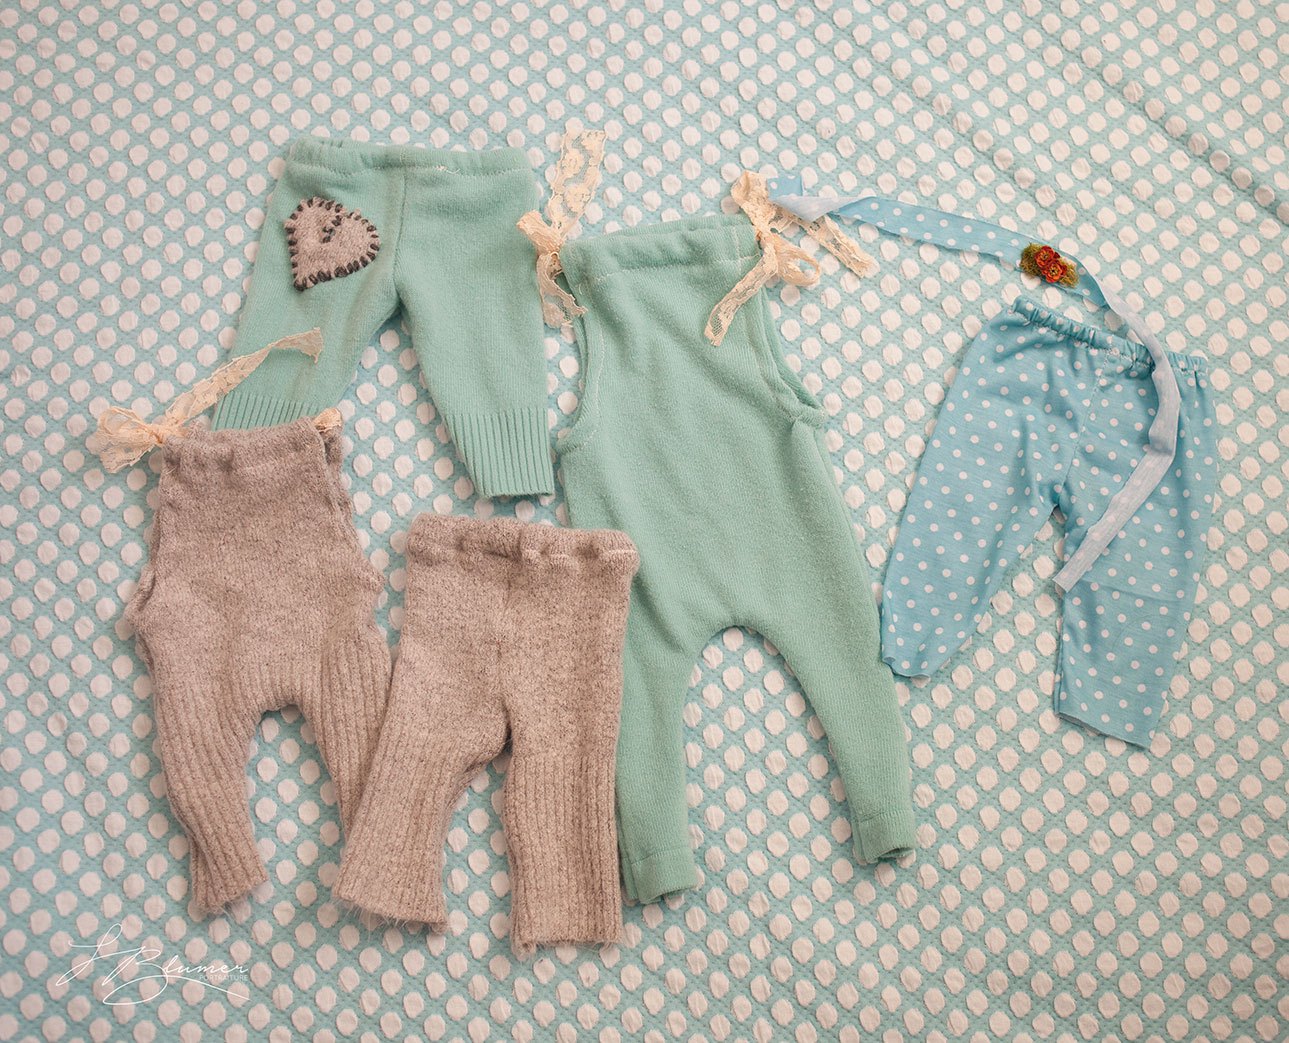 29 baby clothes old sweater